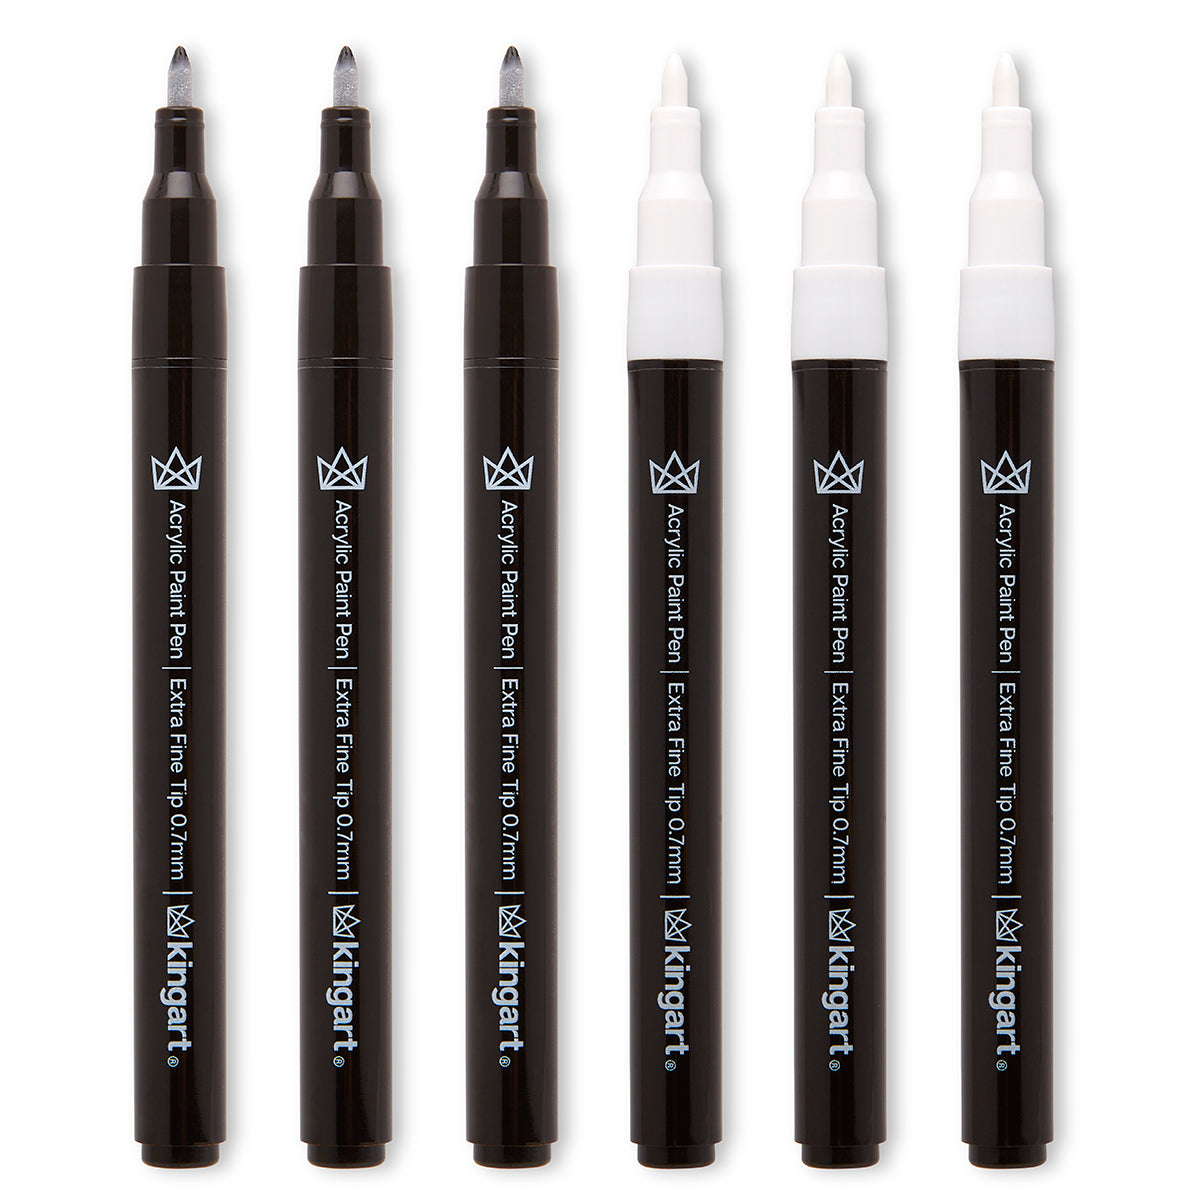 White Paint Pens for Rock Painting, Stone, Ceramic, Glass, Wood. Set of 5  Acrylic Paint Markers White Extra-fine Tip 0.7mm 